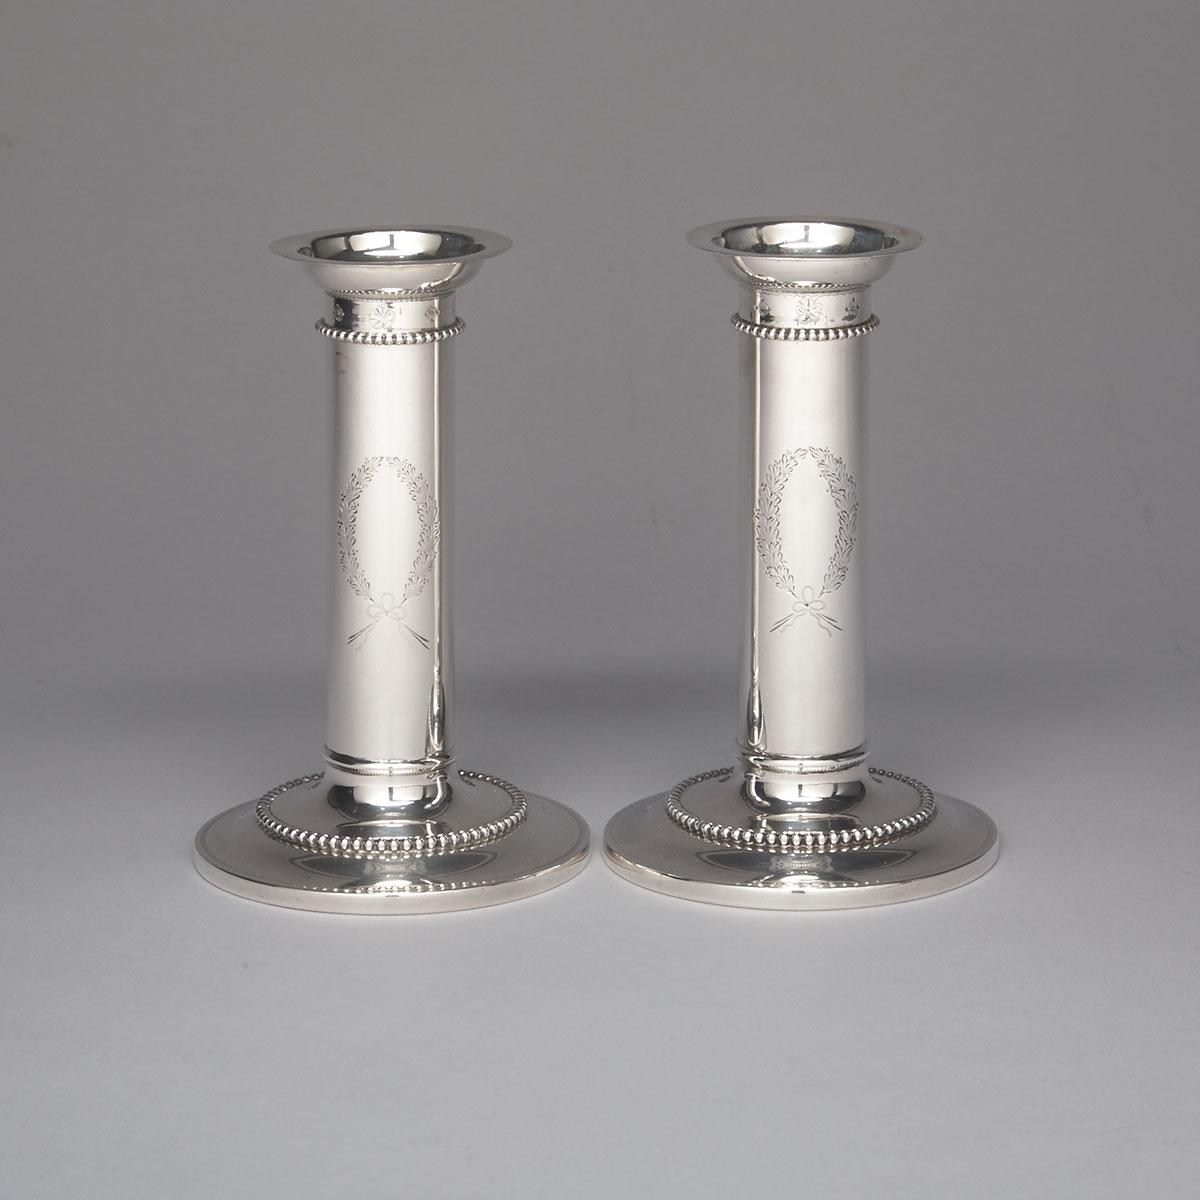 Pair of American Silver Candlesticks, Goodnow & Jenks for Bigelow, Kennard & Co., Boston, Mass., early 20th century